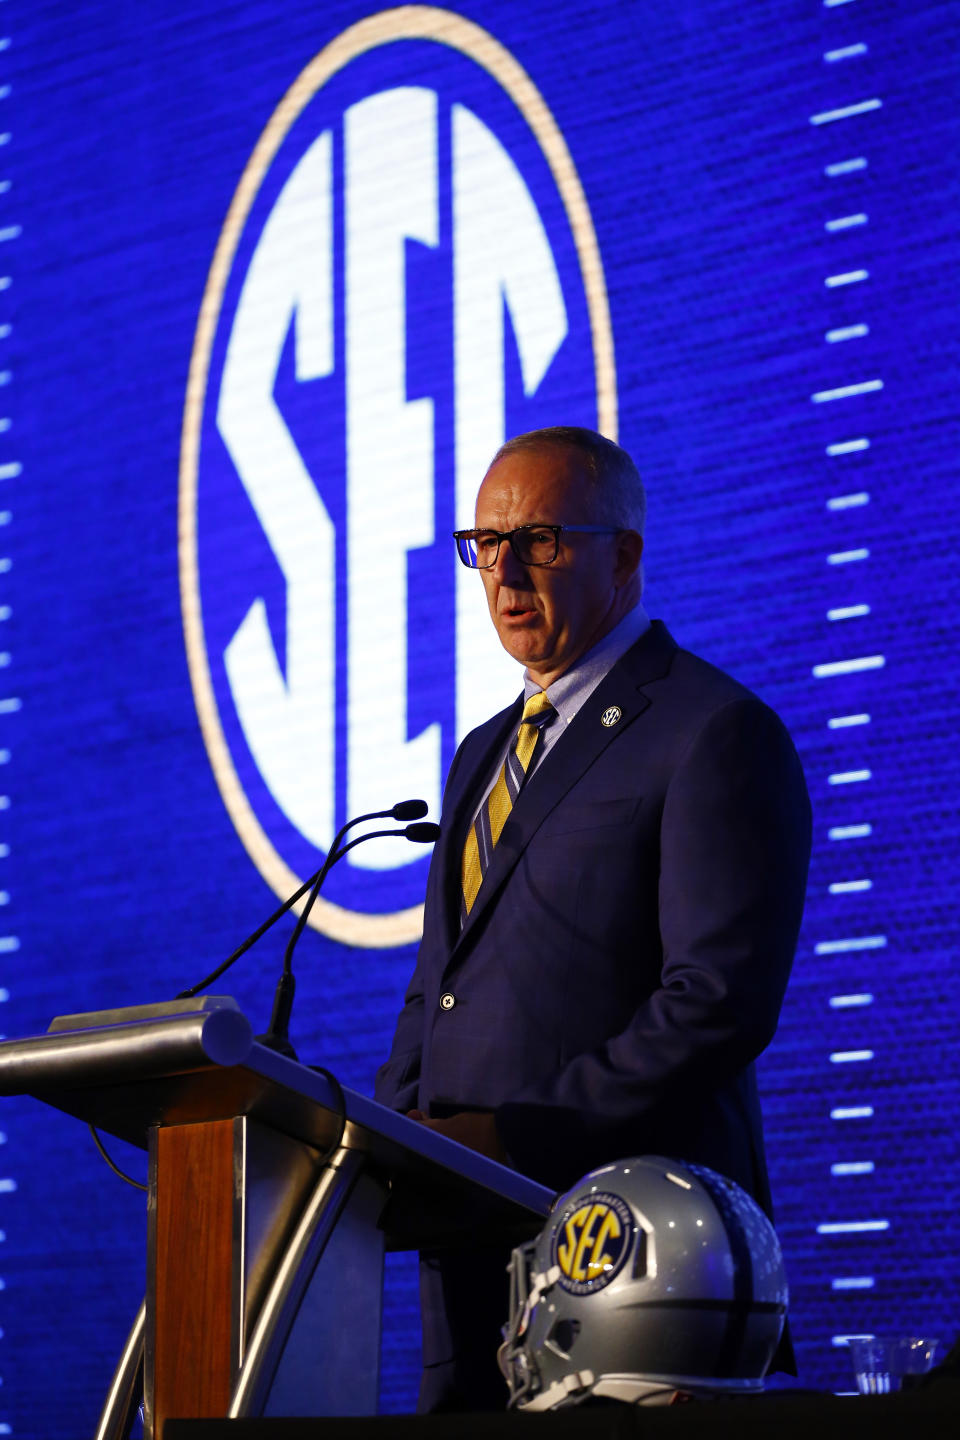 Southeastern Conference commissioner Greg Sankey speaks during the NCAA college football Southeastern Conference Media Days at the Hyatt Regency Birmingham-Wynfrey Hotel, Monday, July 15, 2019, in Hoover, Ala. (AP Photo/Butch Dill)